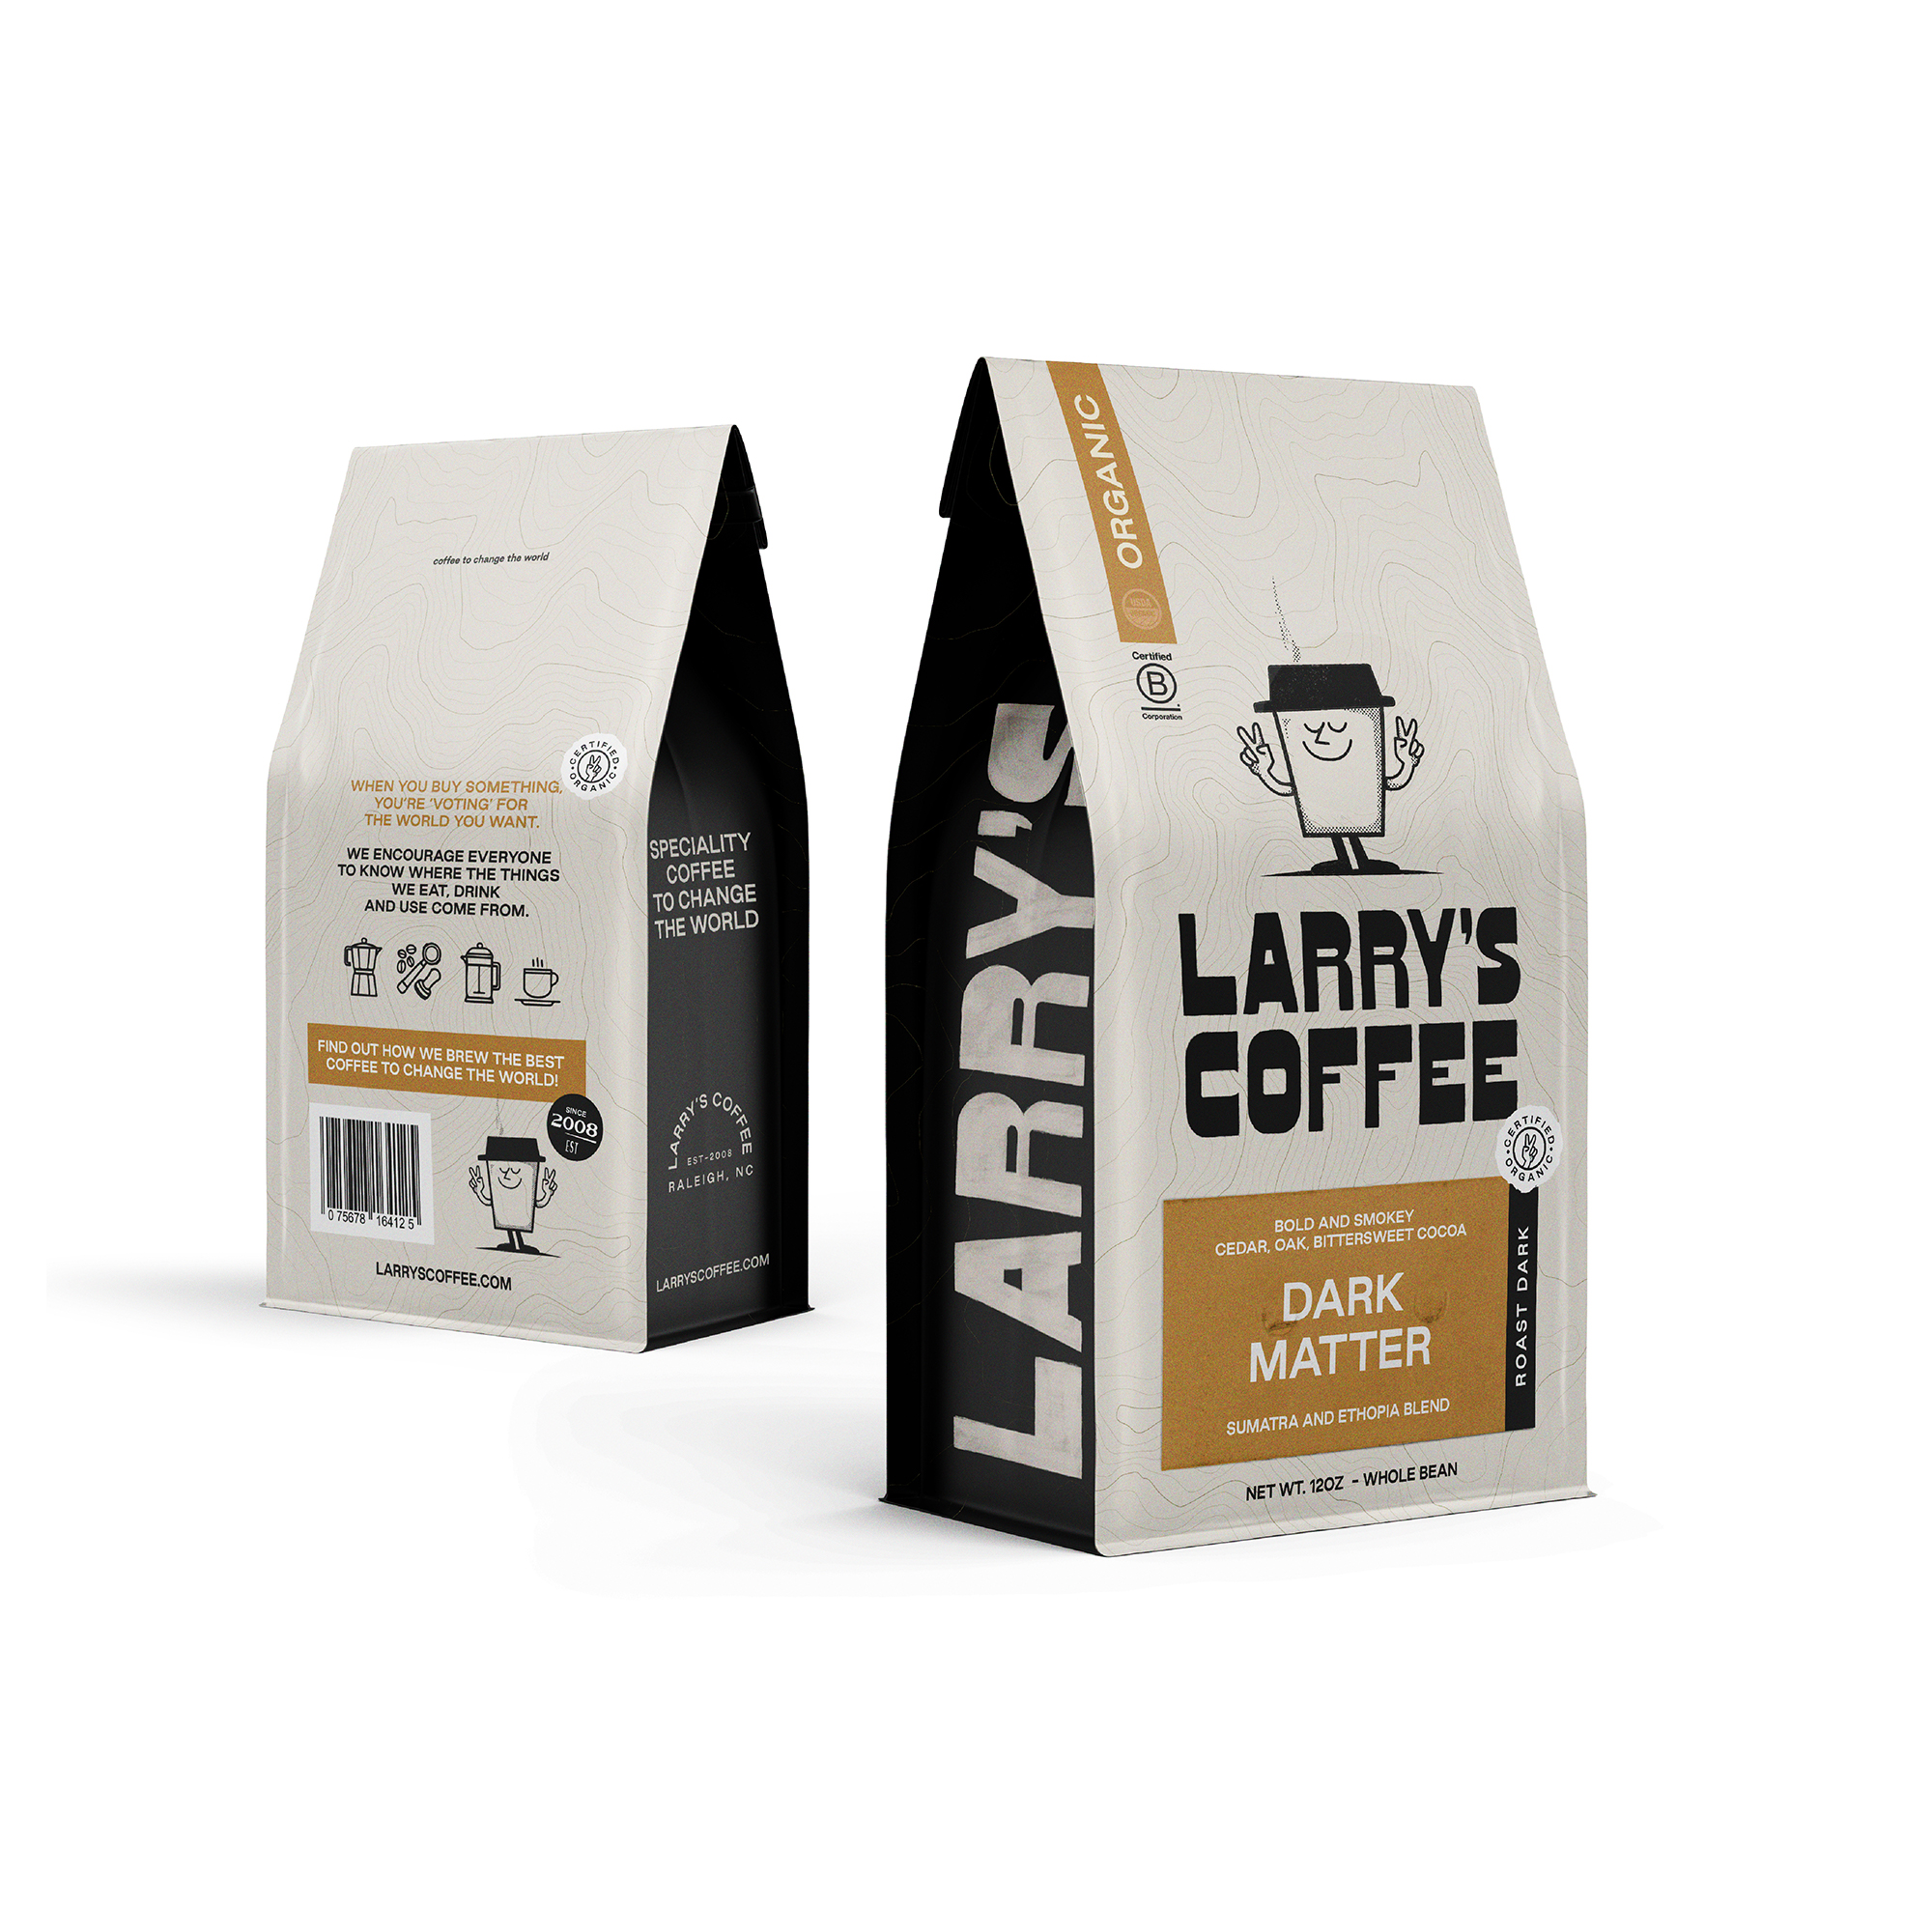 Concept Coffee Branding Inspired by the Founders